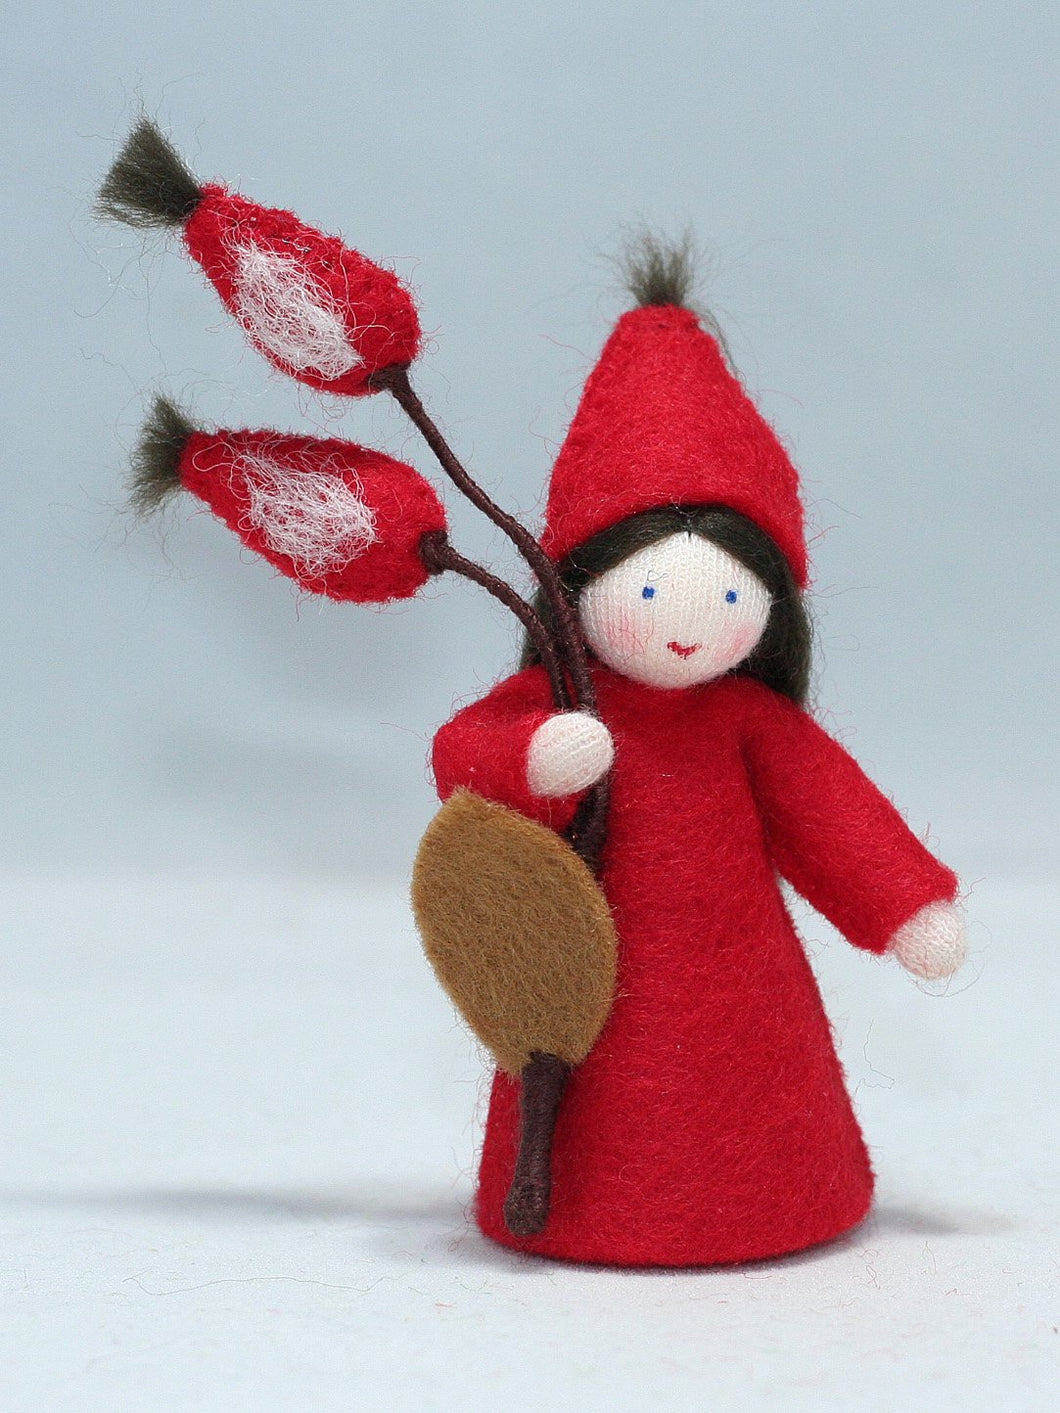 Rose Hips Fairy Felted Waldorf Doll - Four Skin Colors